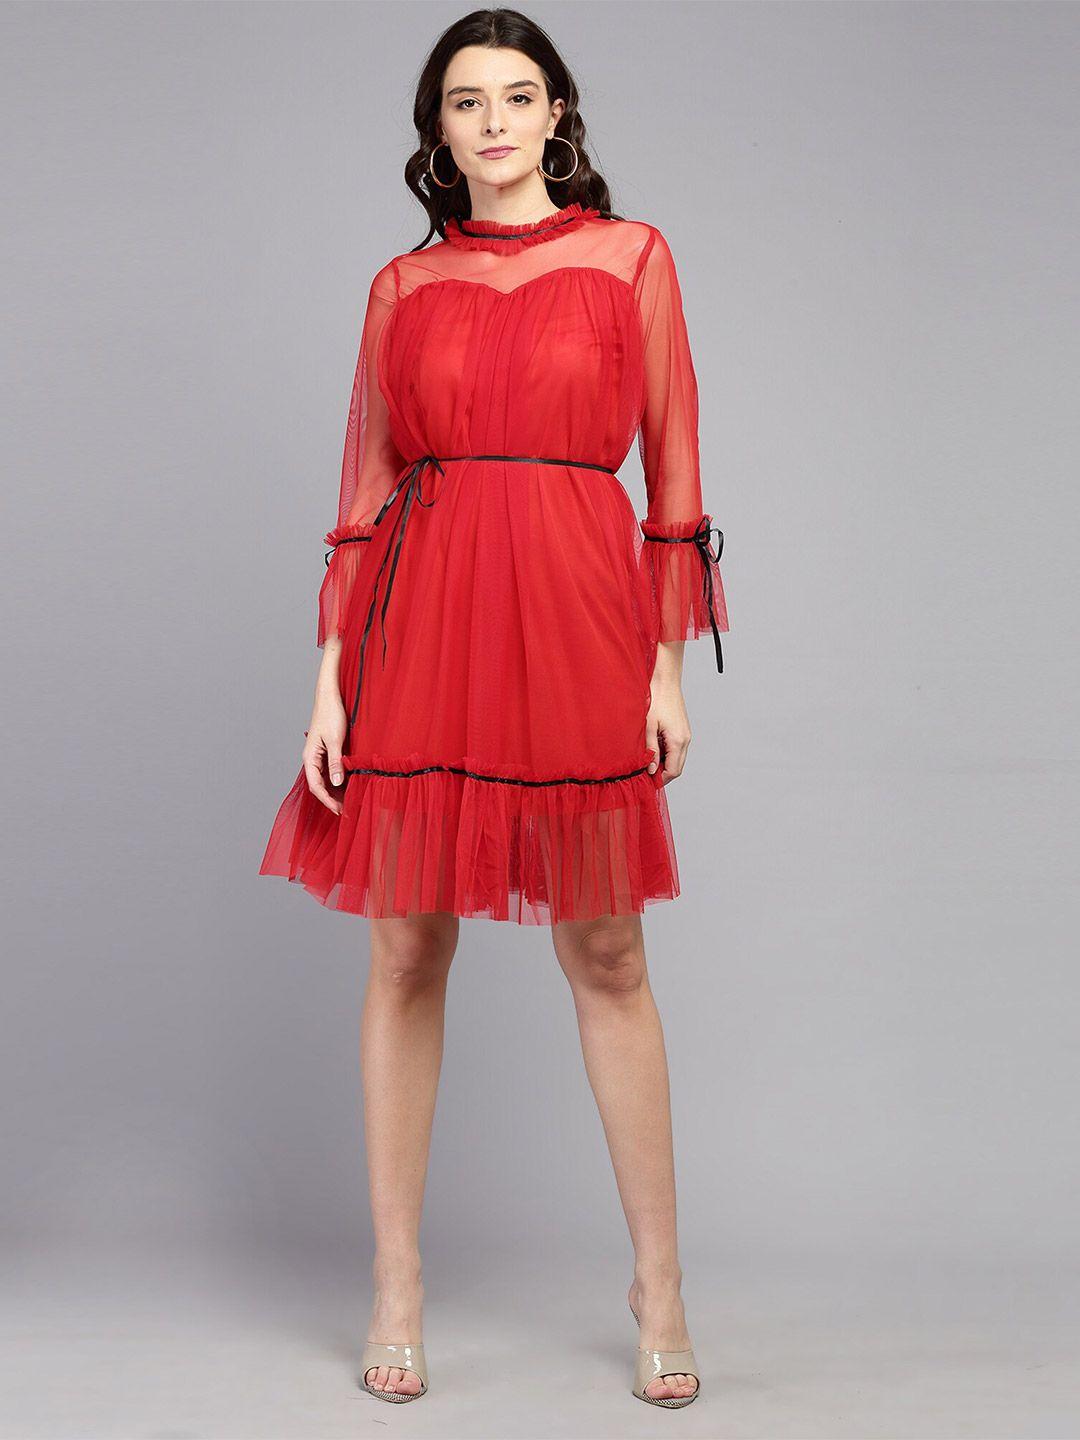 baesd high neck bell sleeves net fit & flare dress